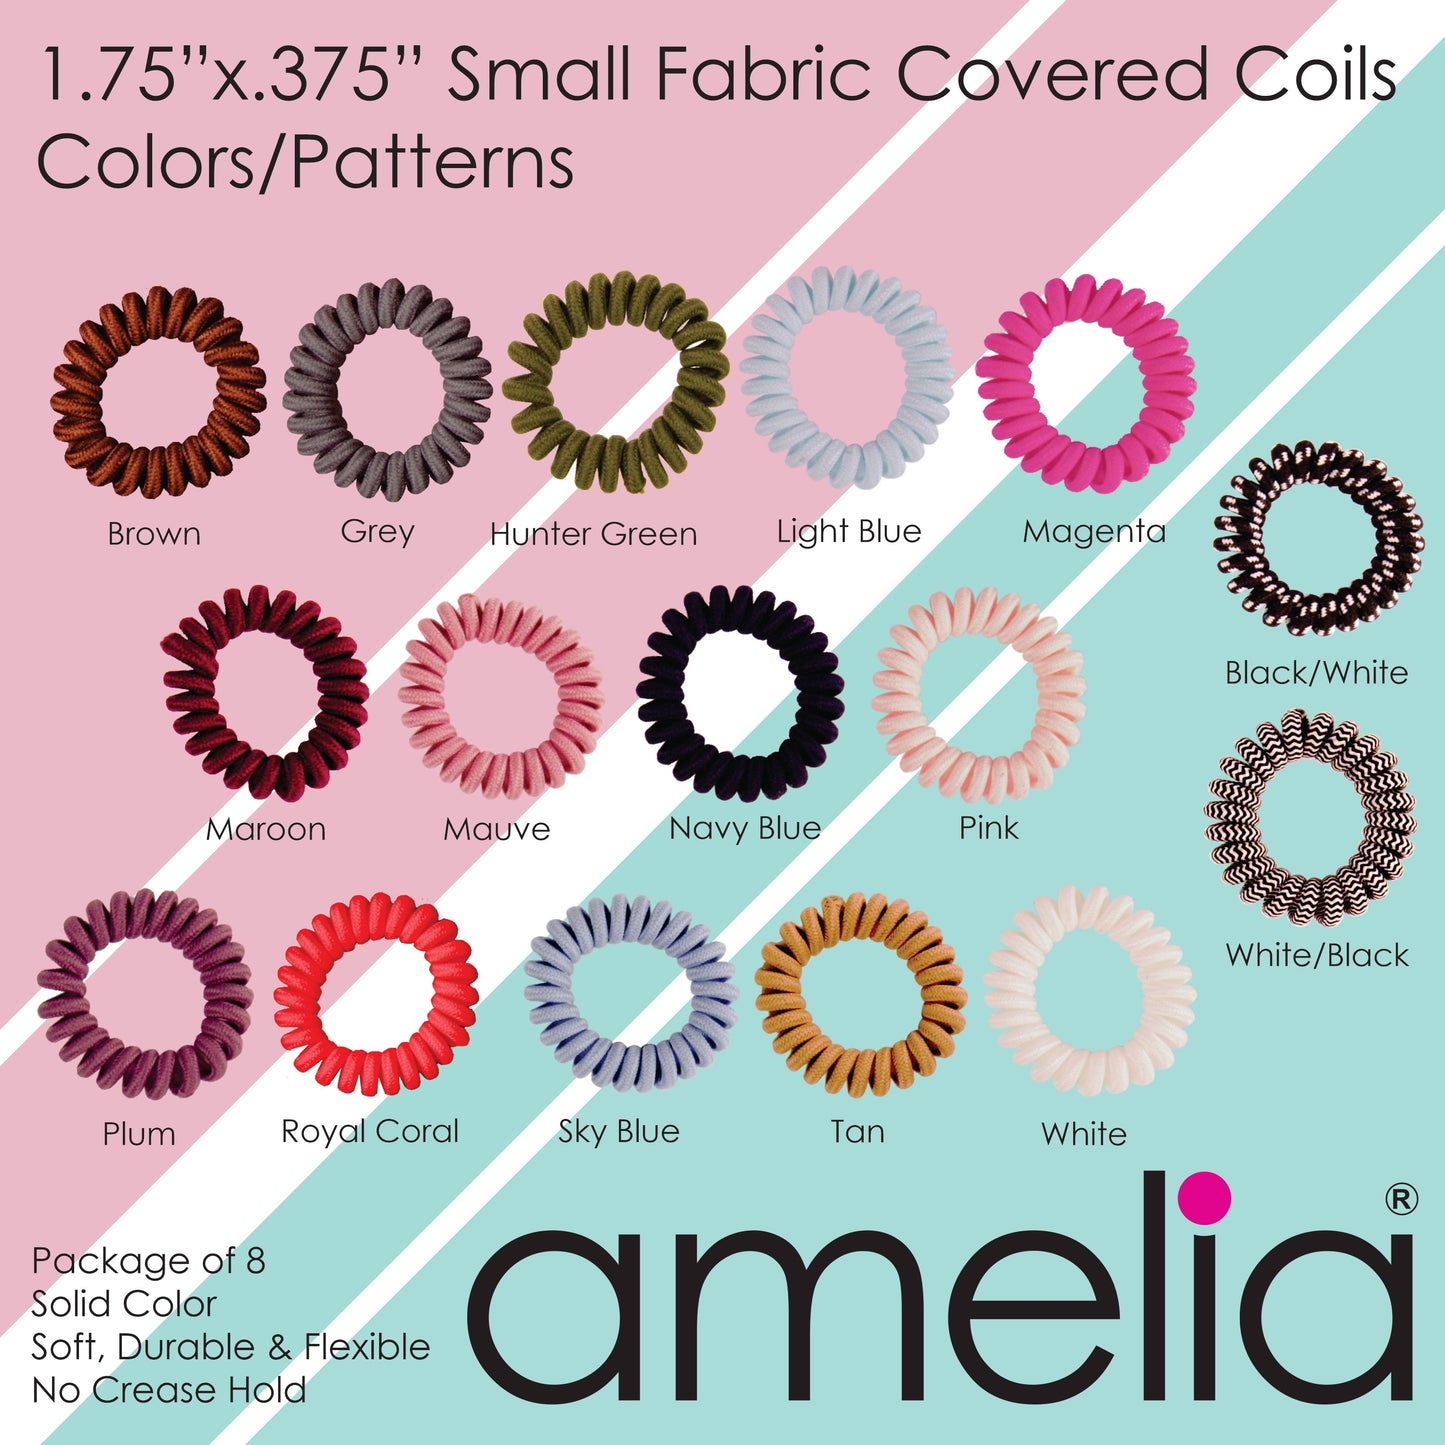 Amelia Beauty, 8 Small Fabric Wrapped Elastic Hair Coils, 1.75in Diameter Spiral Hair Ties, Gentle on Hair, Strong Hold and Minimizes Dents and Creases, Mauve